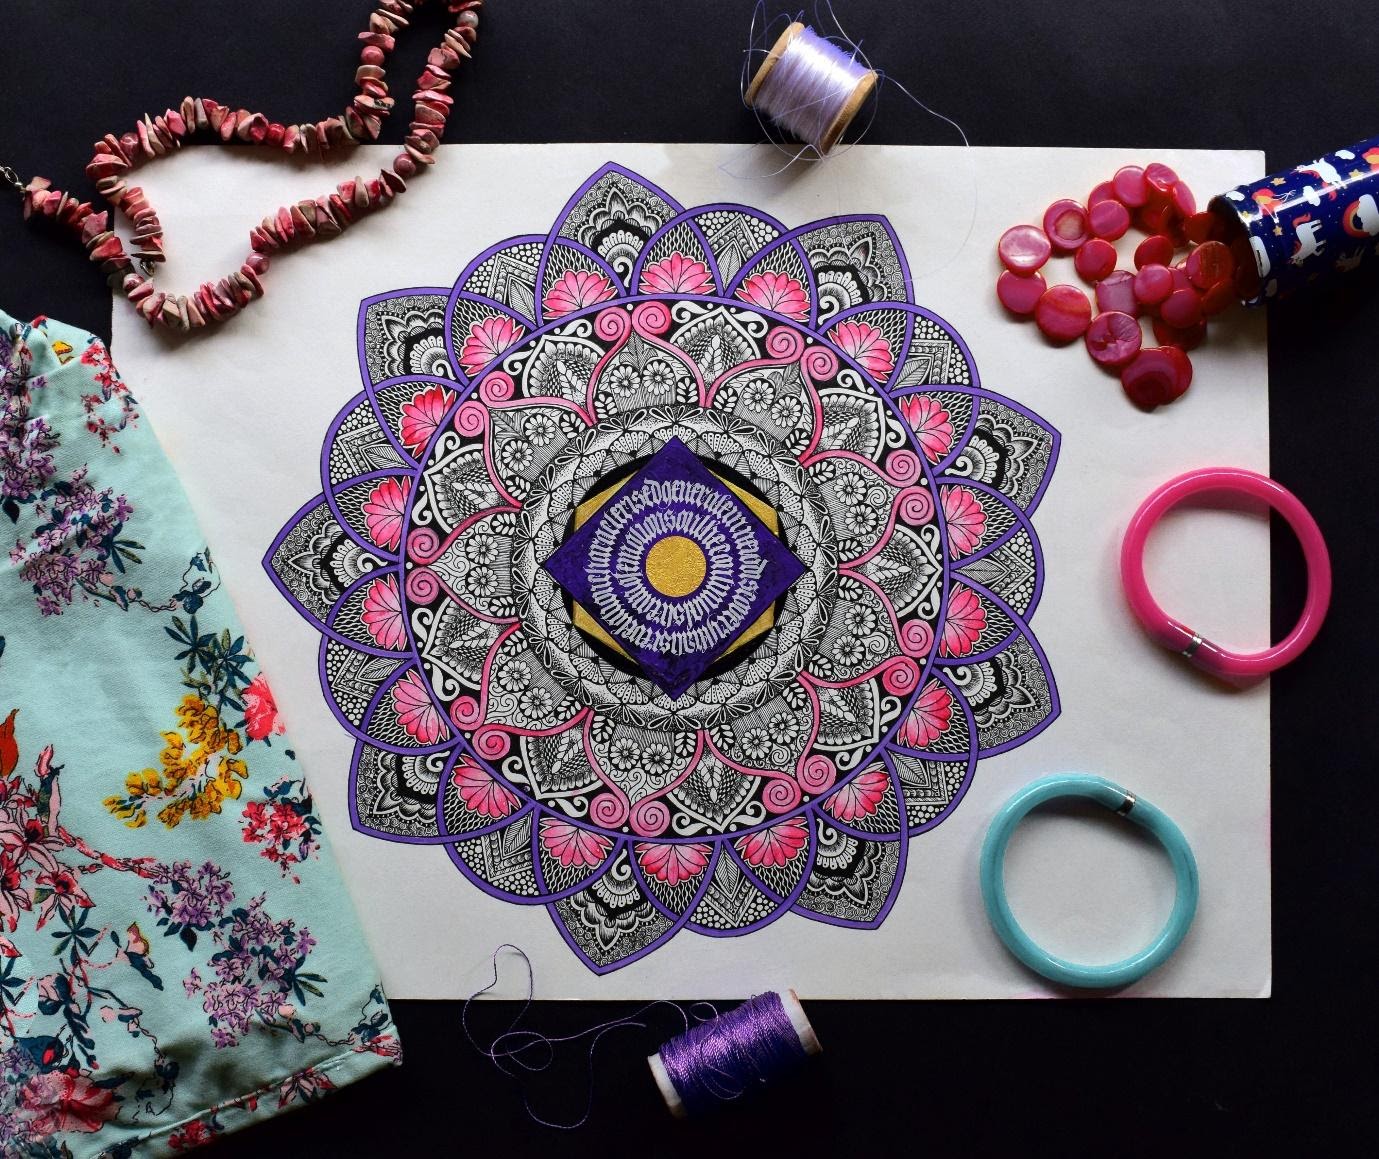 A mandala drawn and colored in on a sheet of paper